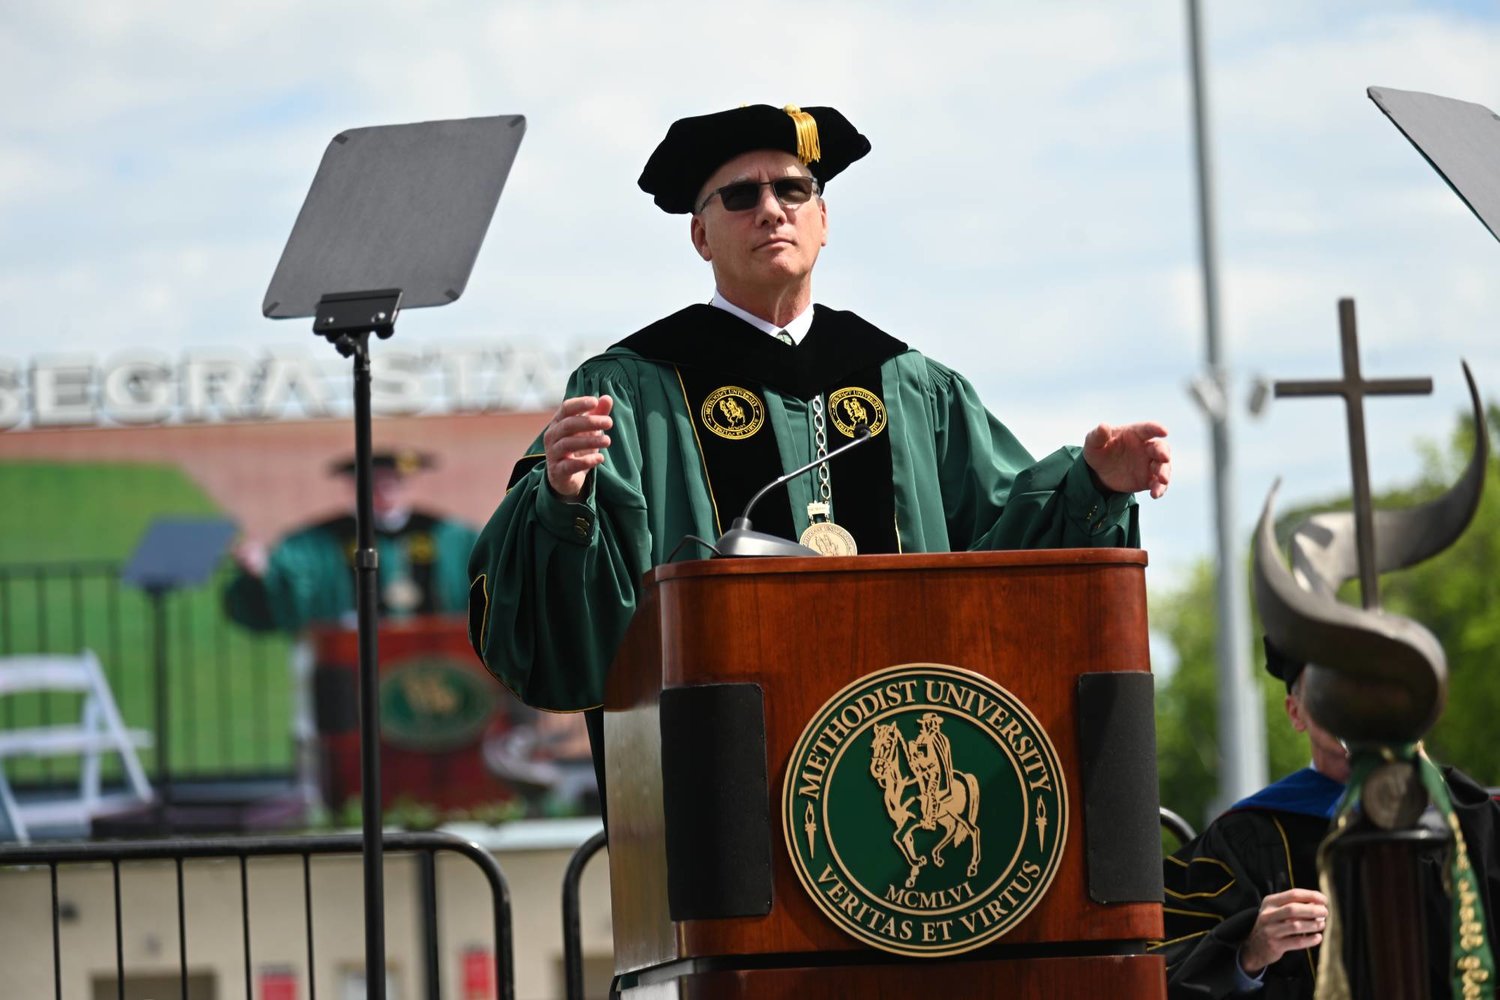 Methodist University President Stanley T. Wearden addresses the Class of 2022 during the 59th annual spring commencement ceremony at Segra Stadium on Saturday.